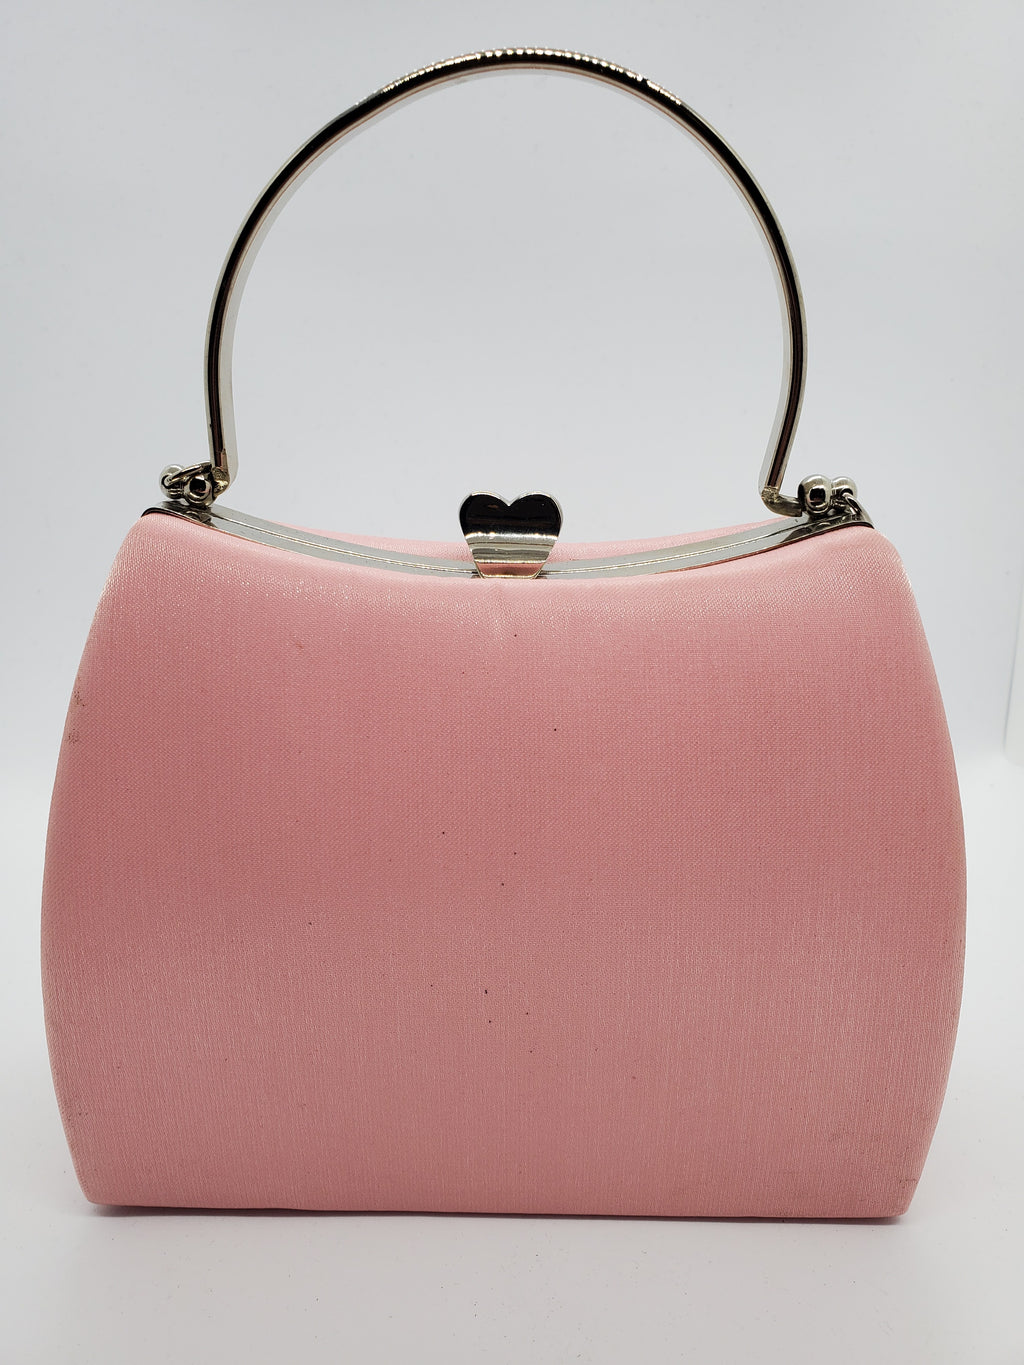 Front View of Light pink satin hard shell purse